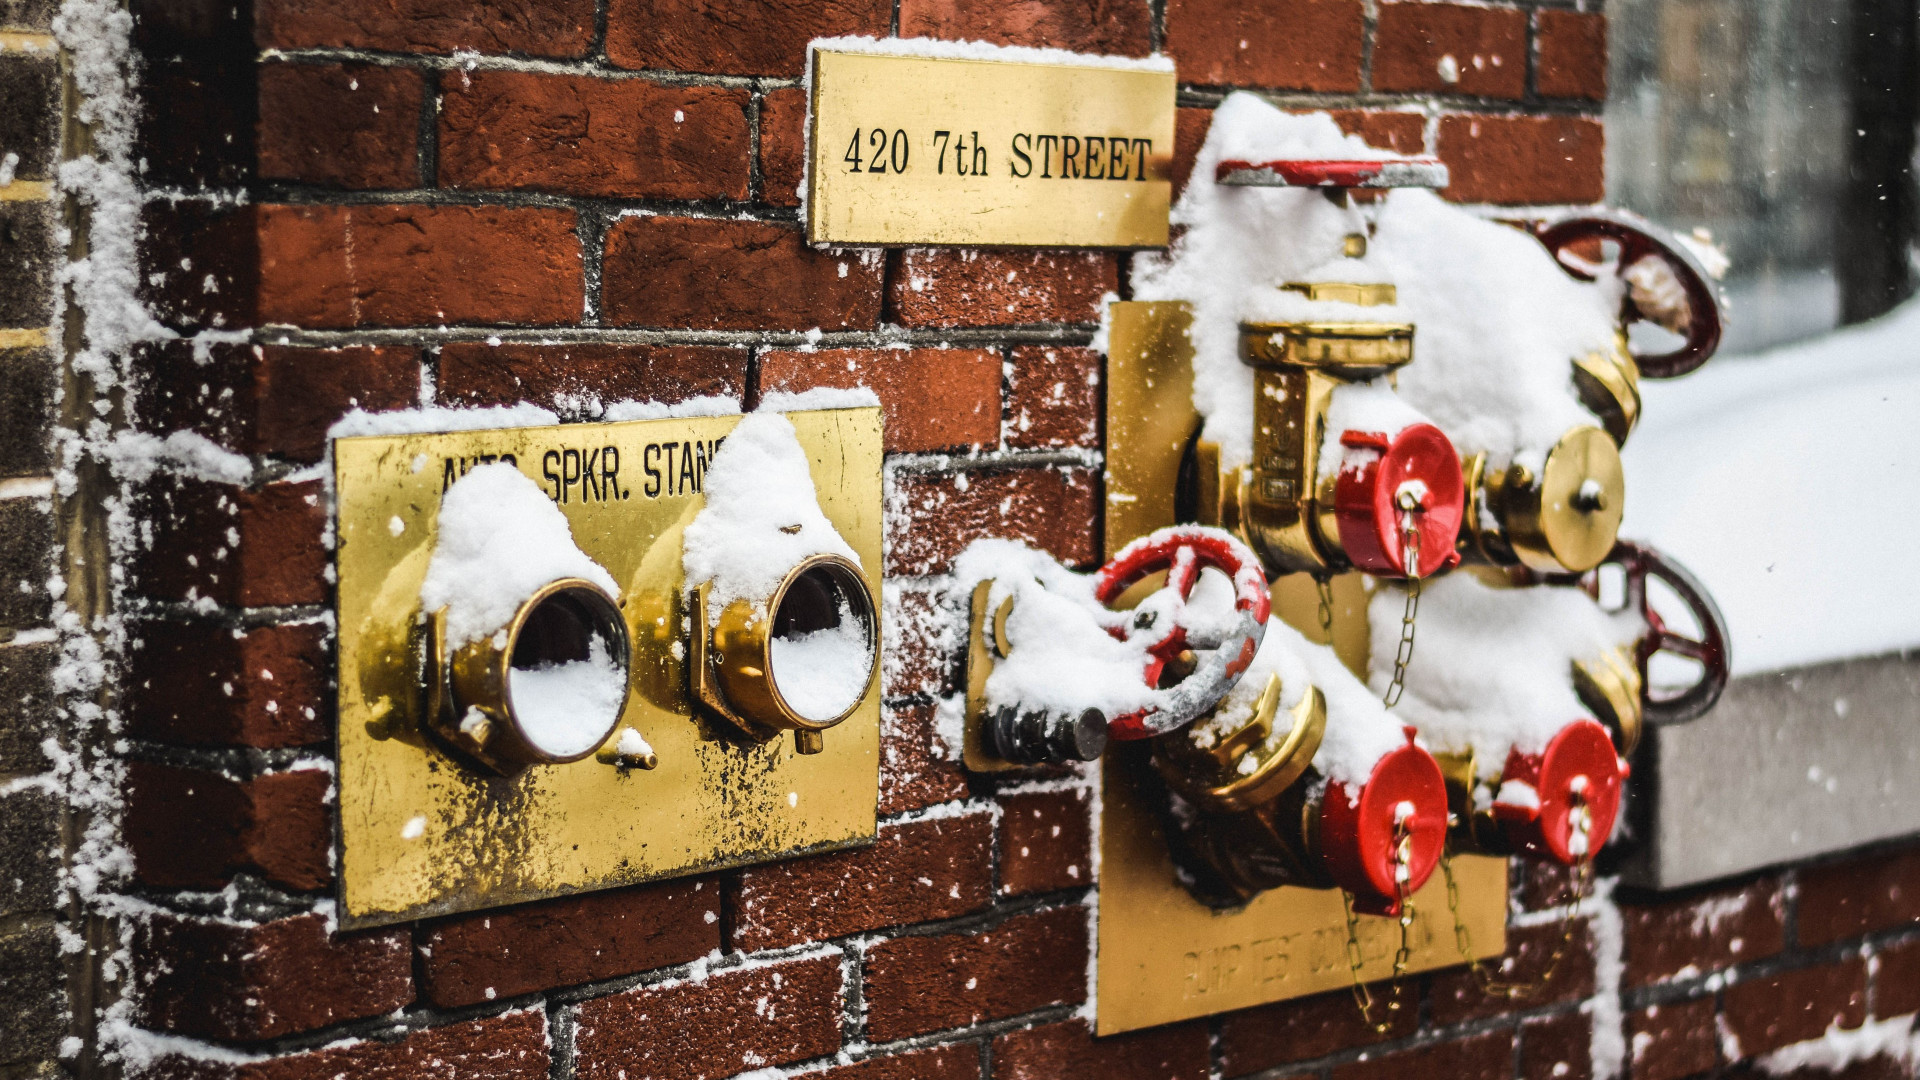 Snow covered fire standpipes in Washington wallpaper 1920x1080